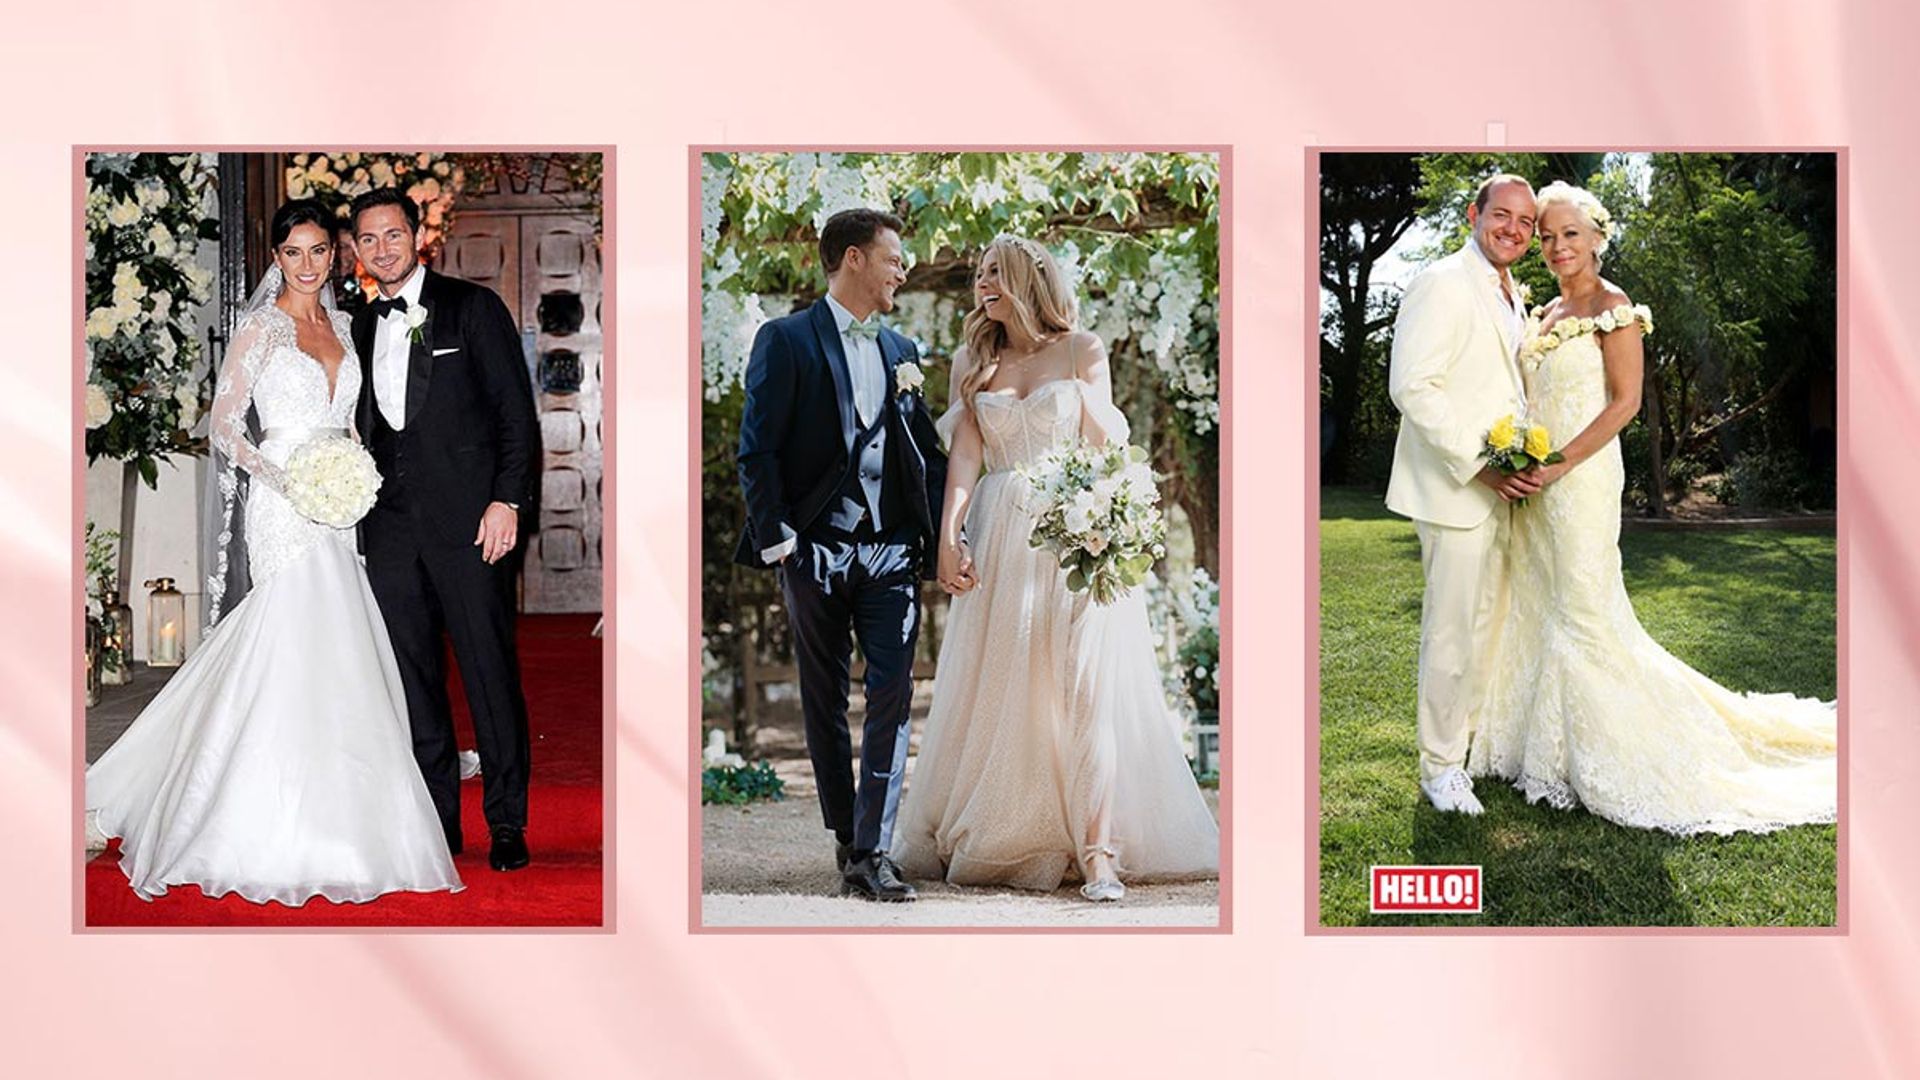 Loose Women's daring brides: 9 bold and beautiful wedding dresses we never expected